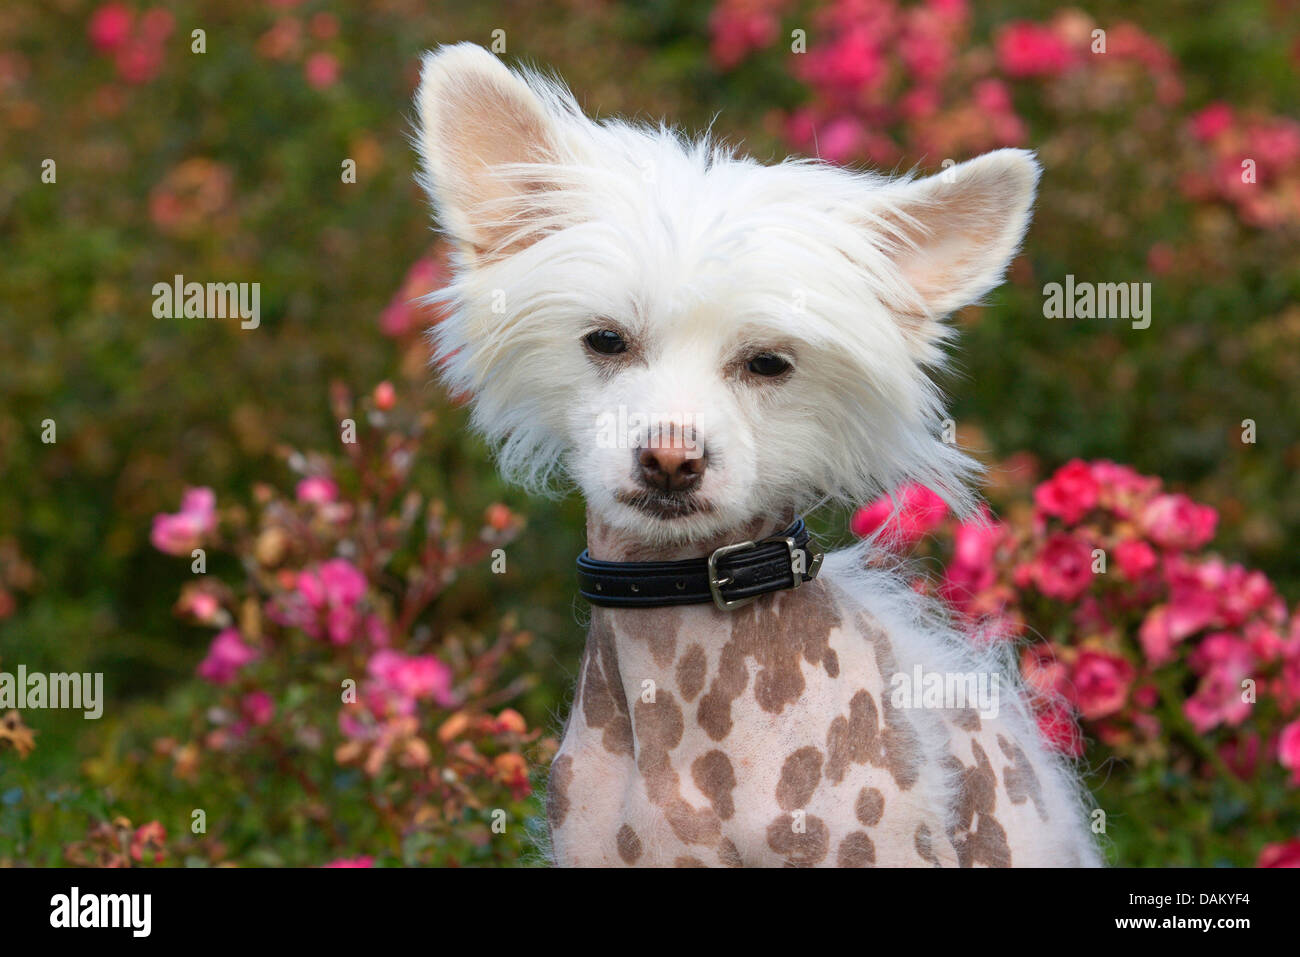 Chinese Crested Dog (Canis lupus f. familiaris), portrait Stock Photo